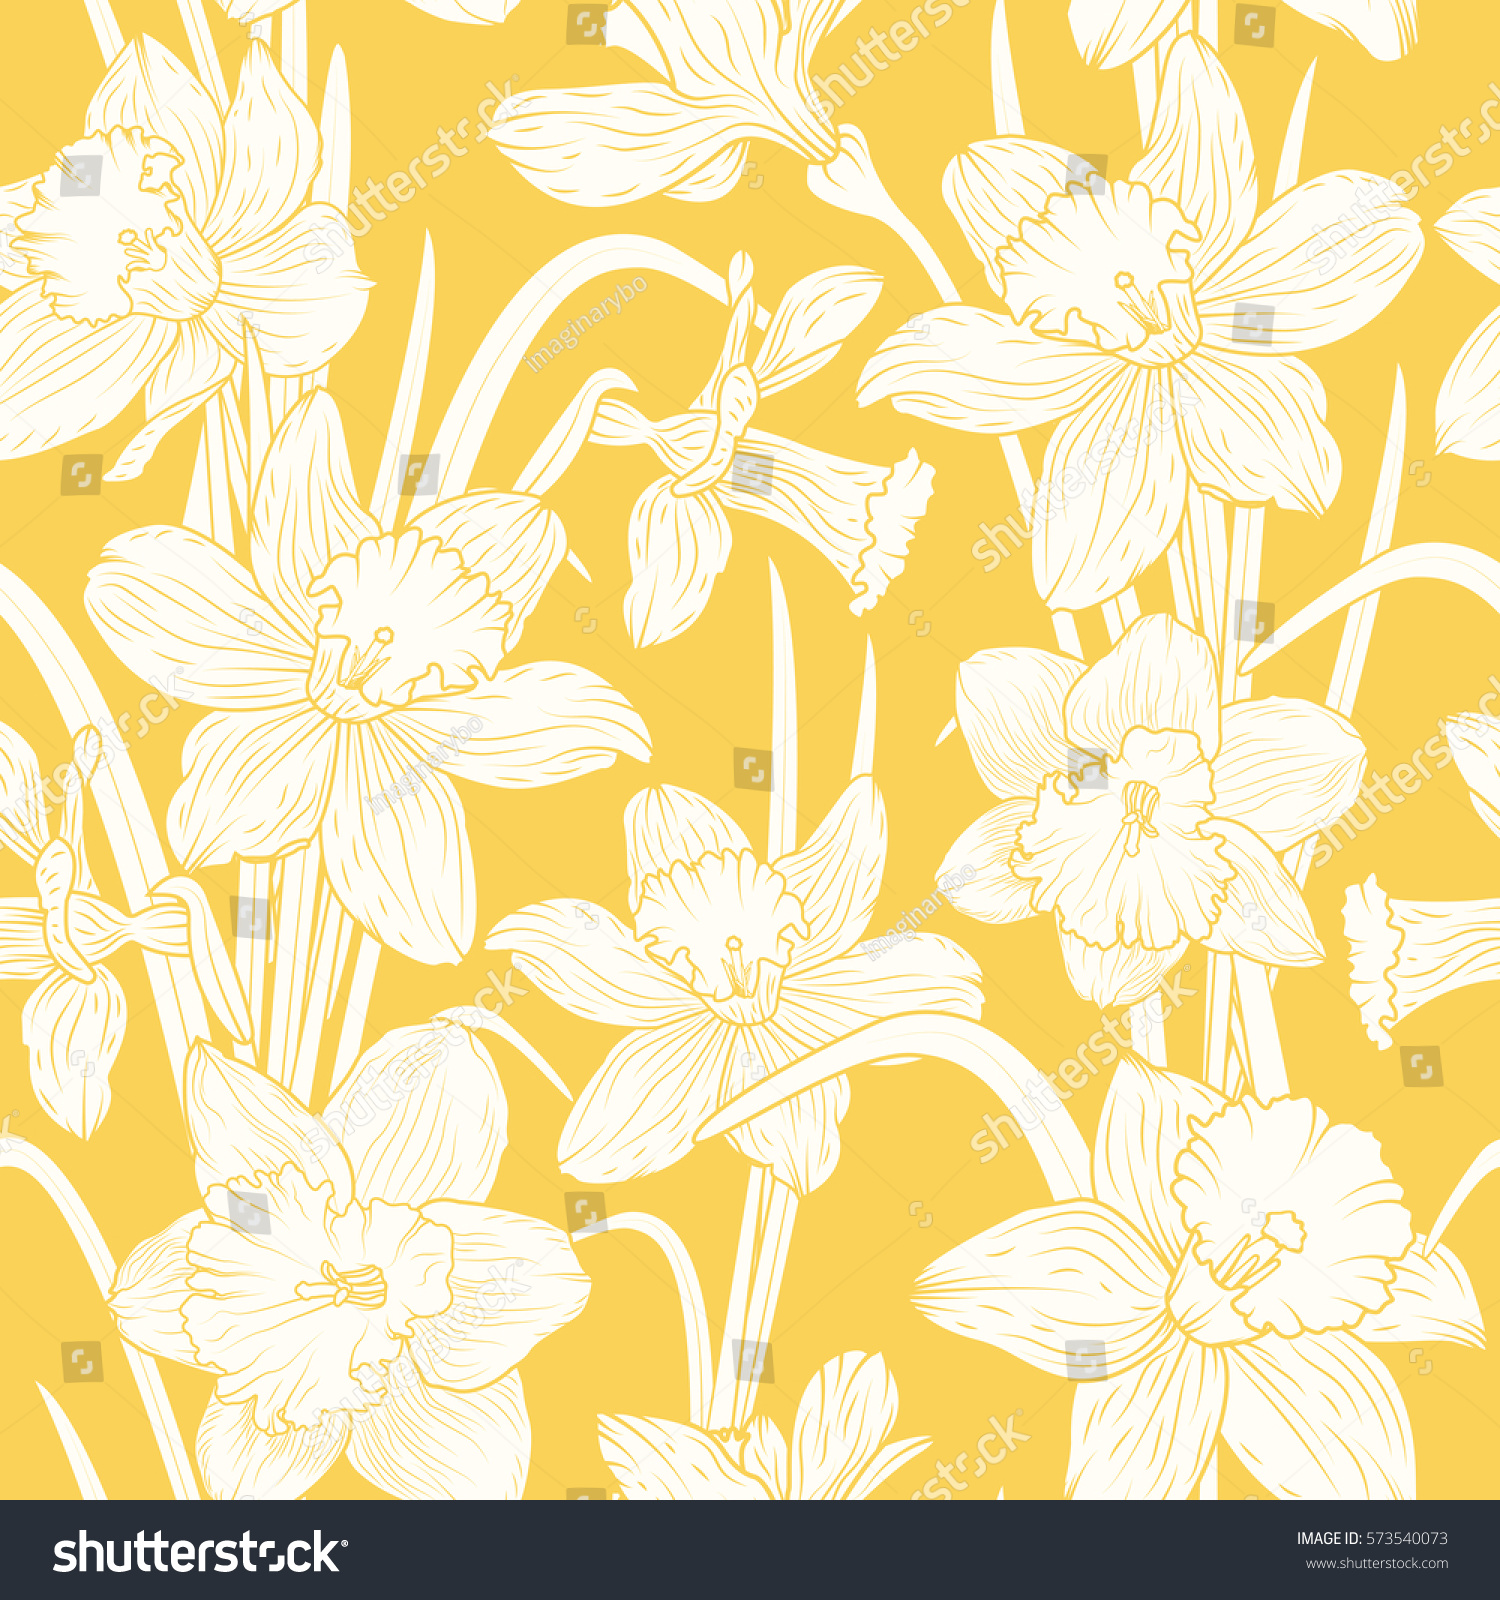 SVG of Narcissus daffodils seamless spring floral pattern. Beige flowers foliage garland on bright yellow background. Realistic detailed botanical outline sketch drawing vector design illustration. svg